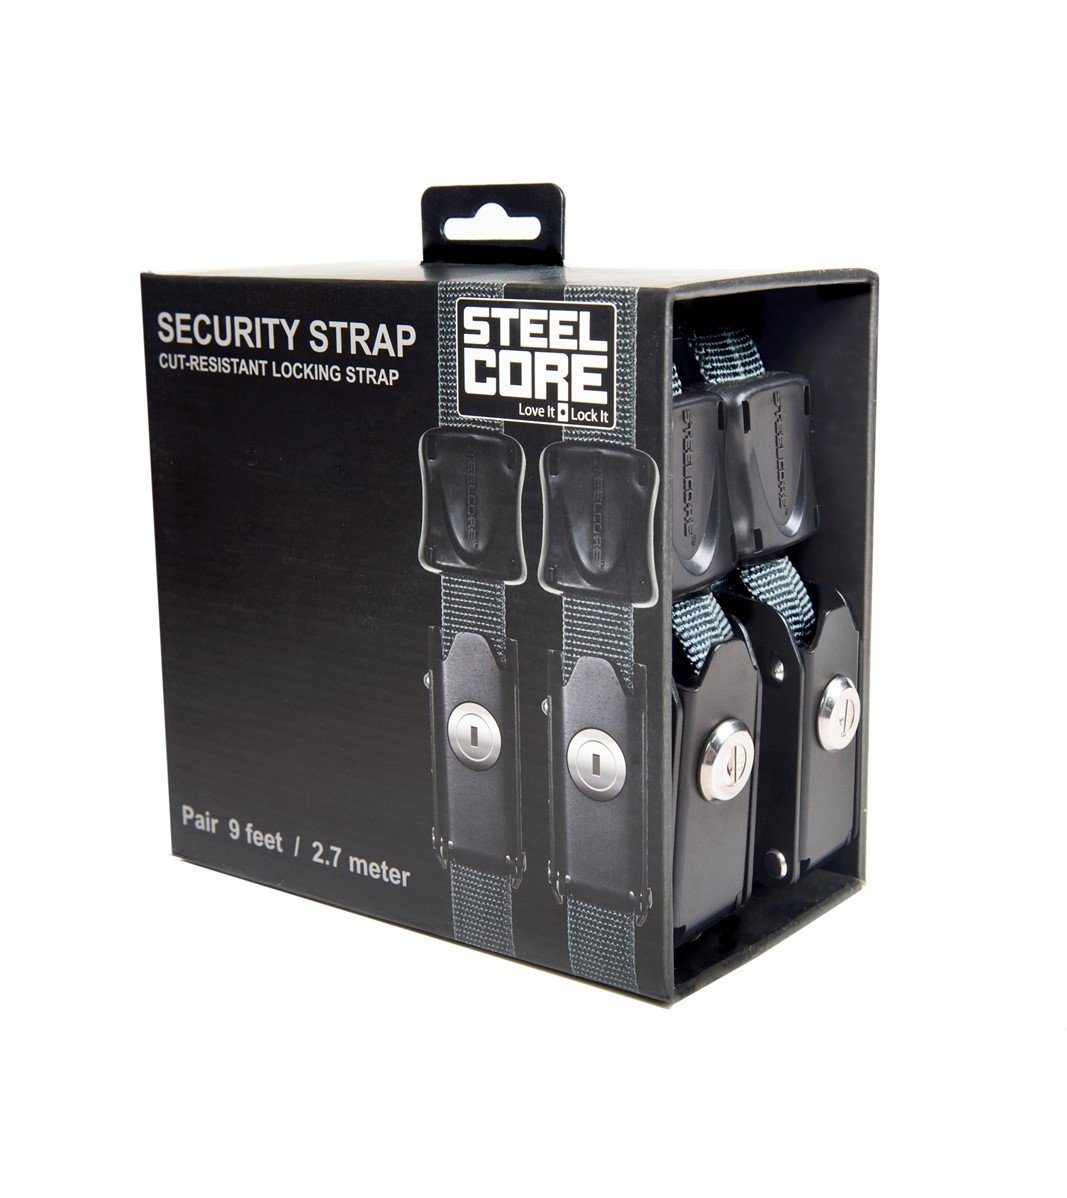 Steelcore Security Strap Pair, SSB-9-P, locking straps, locks, security, steelcore, Accessories - Steelcore Theft Resistant Locking Security Straps are ideal for securing your assets including bikes, motorcycles, surfboards, coolers, sporting goods, tools, and more. - Imported and distributed in North &amp; South America by Lindeco Genuine Powersports.